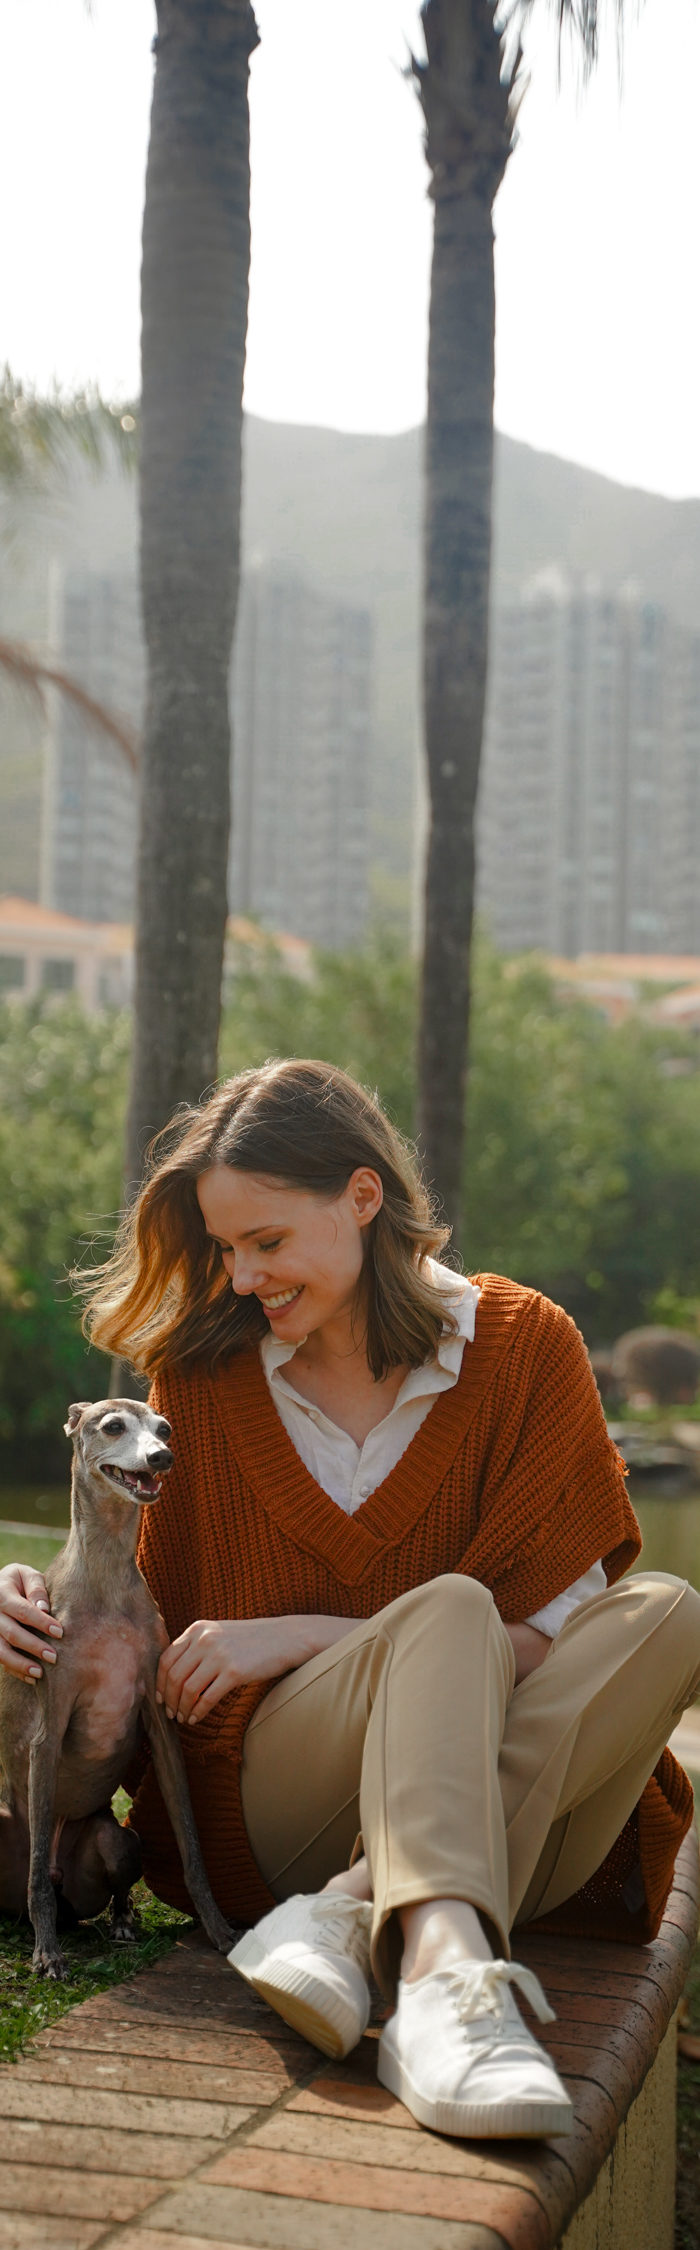 Alyssa Campanella of The A List blog and Argos the dog in Hong Kong